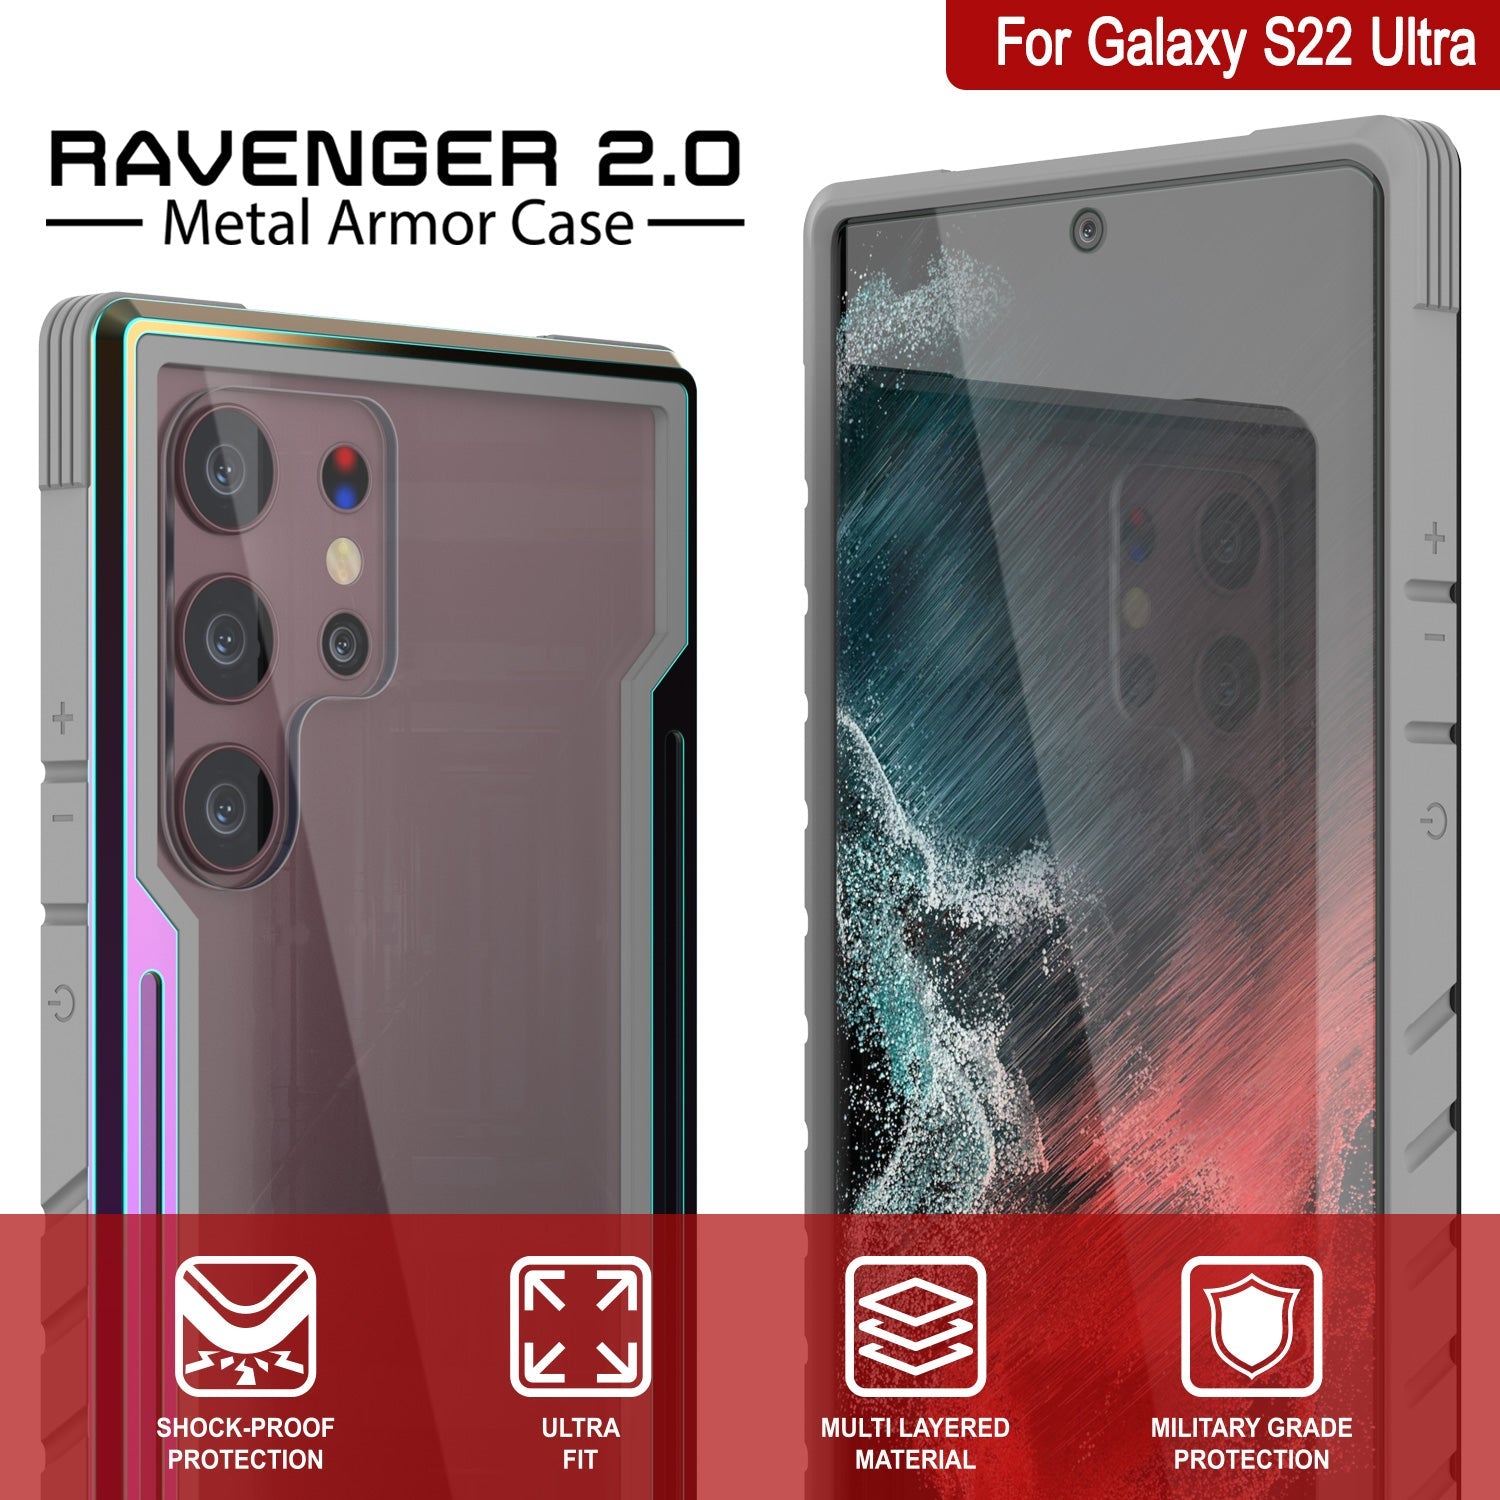 Punkcase S22 Ultra ravenger Case Protective Military Grade Multilayer Cover [Rainbow]